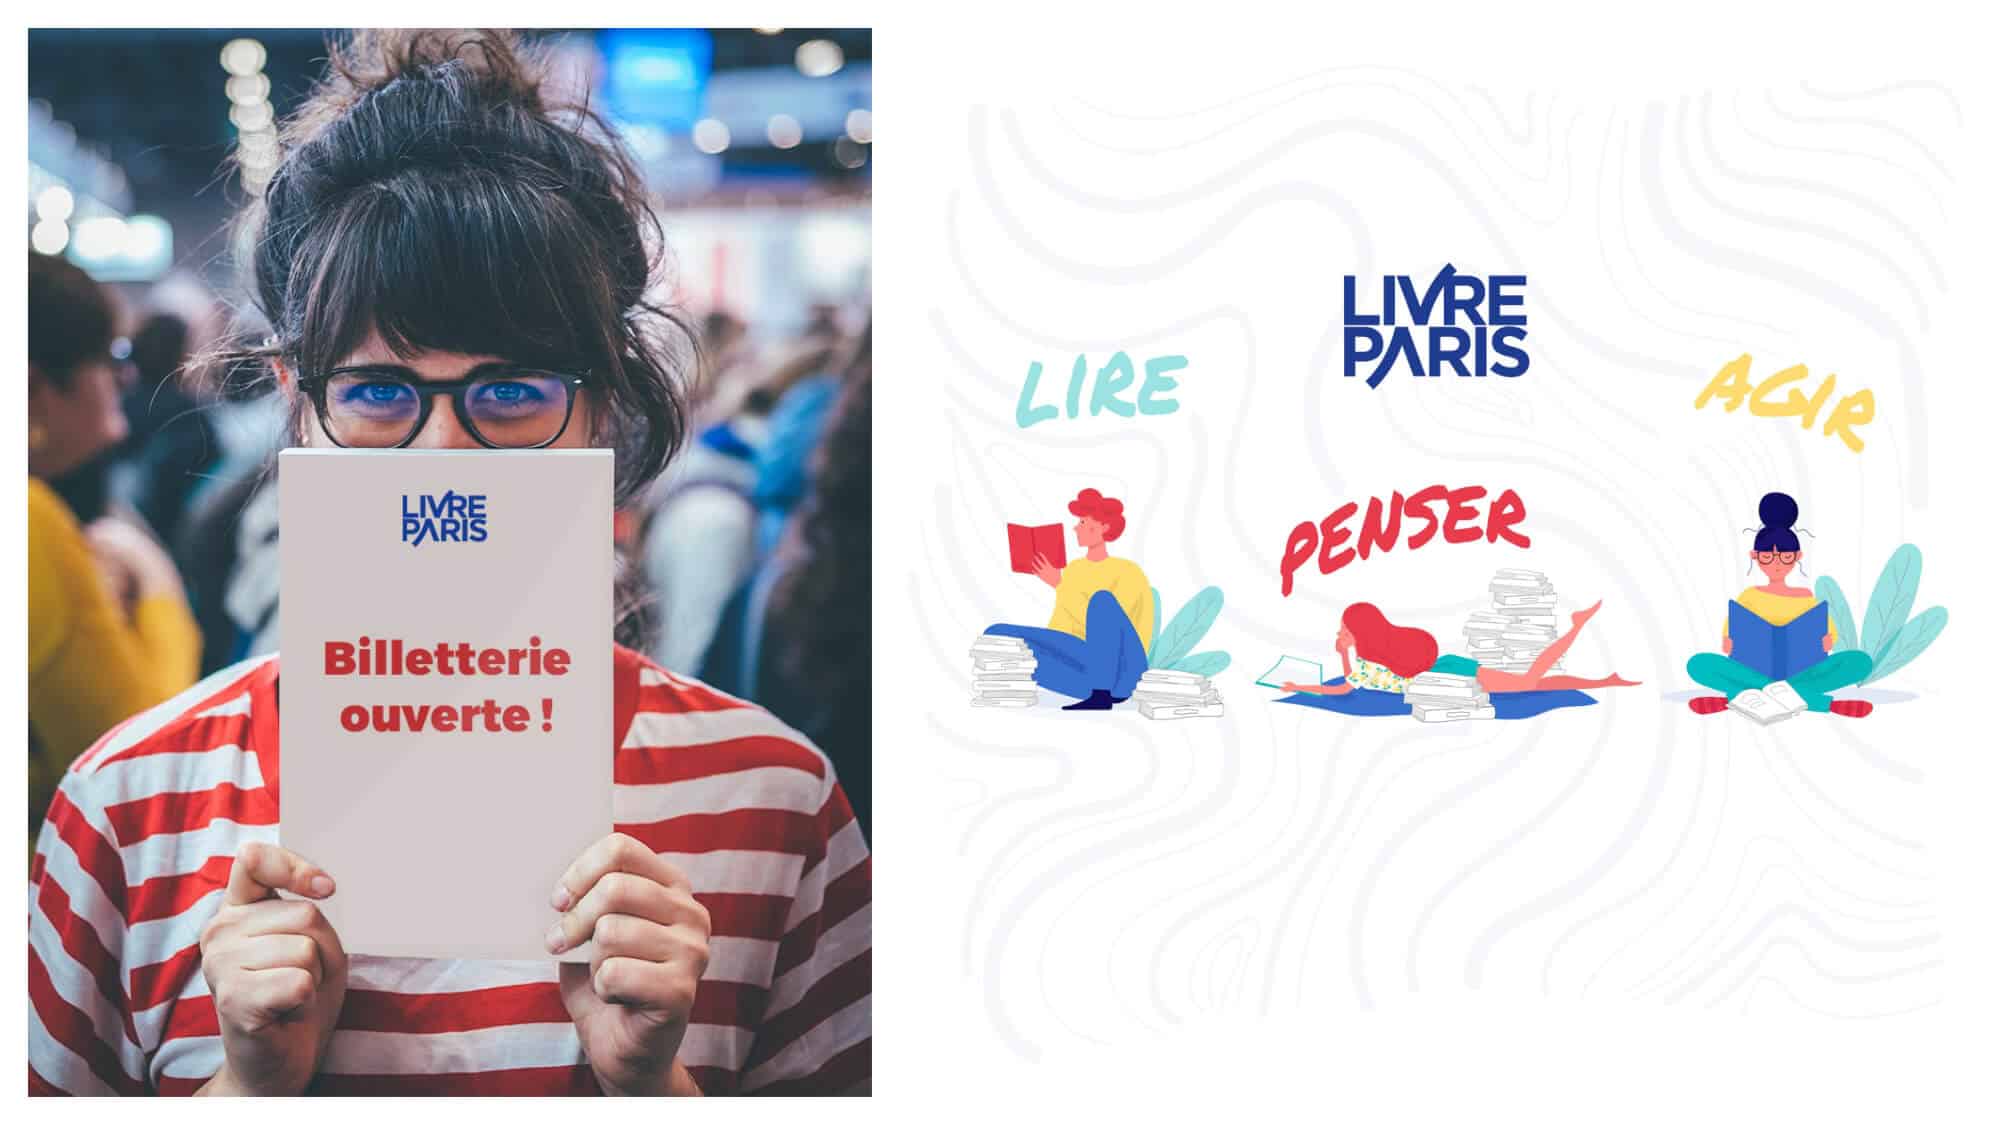 Left, a girl holding up a book that reads "tickets now on sale" for the Paris book fair in March. Right, a poster advertising the Paris book fair.